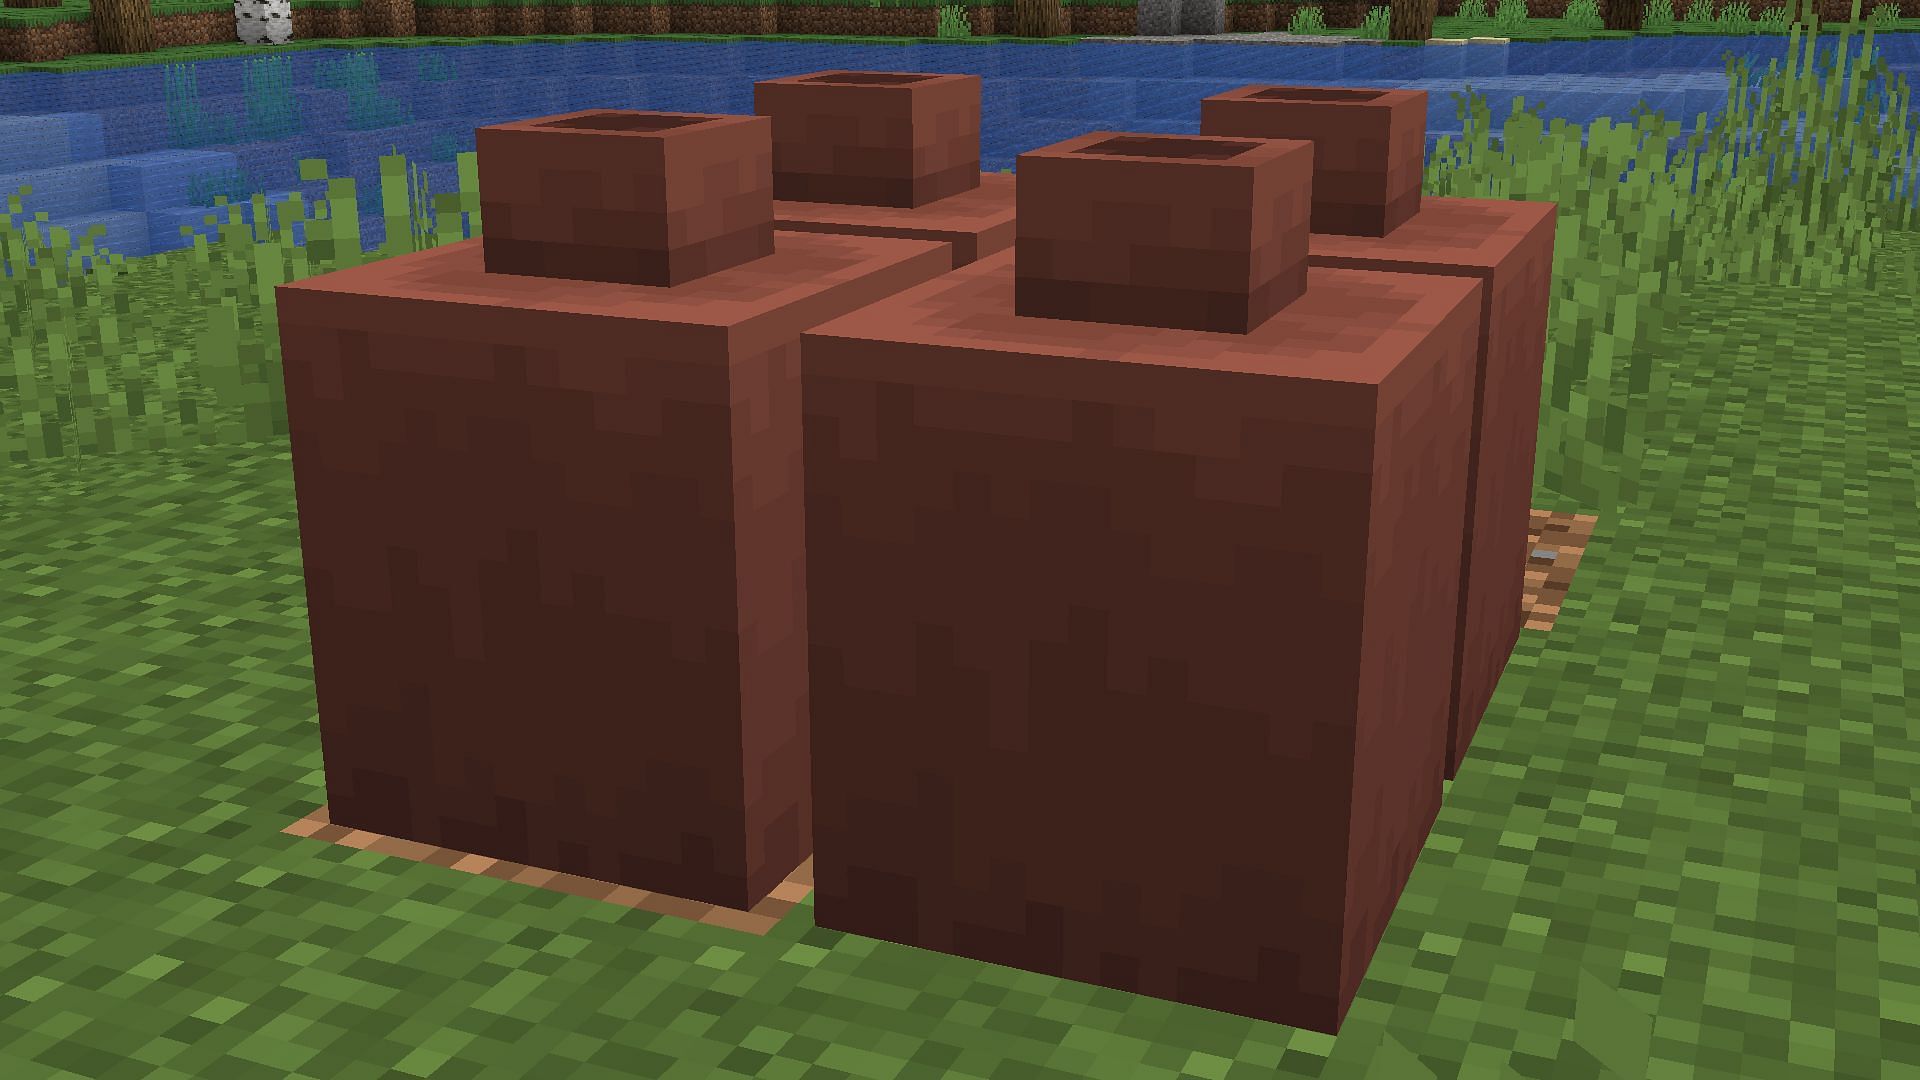 Decorated pots are part of the archeology update and are new decoration blocks in the Minecraft 1.20 Trails and Tales update (Image via Mojang)